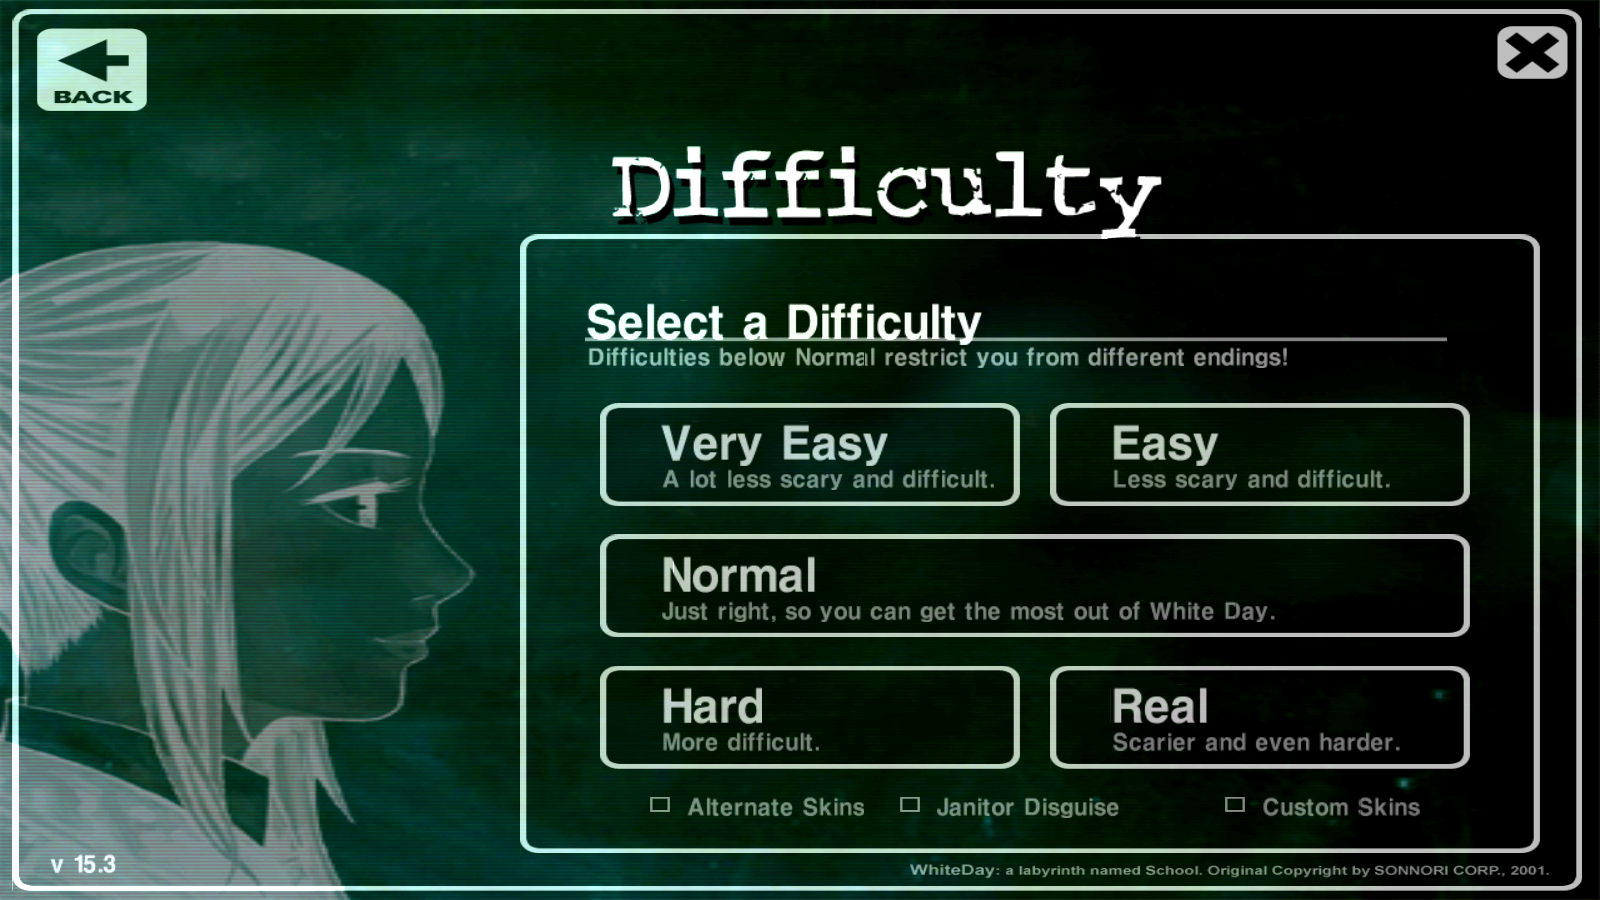 The game are difficult. Difficulty игра. Хард гейм. Select difficulty. White Day a Labyrinth named School 2001.